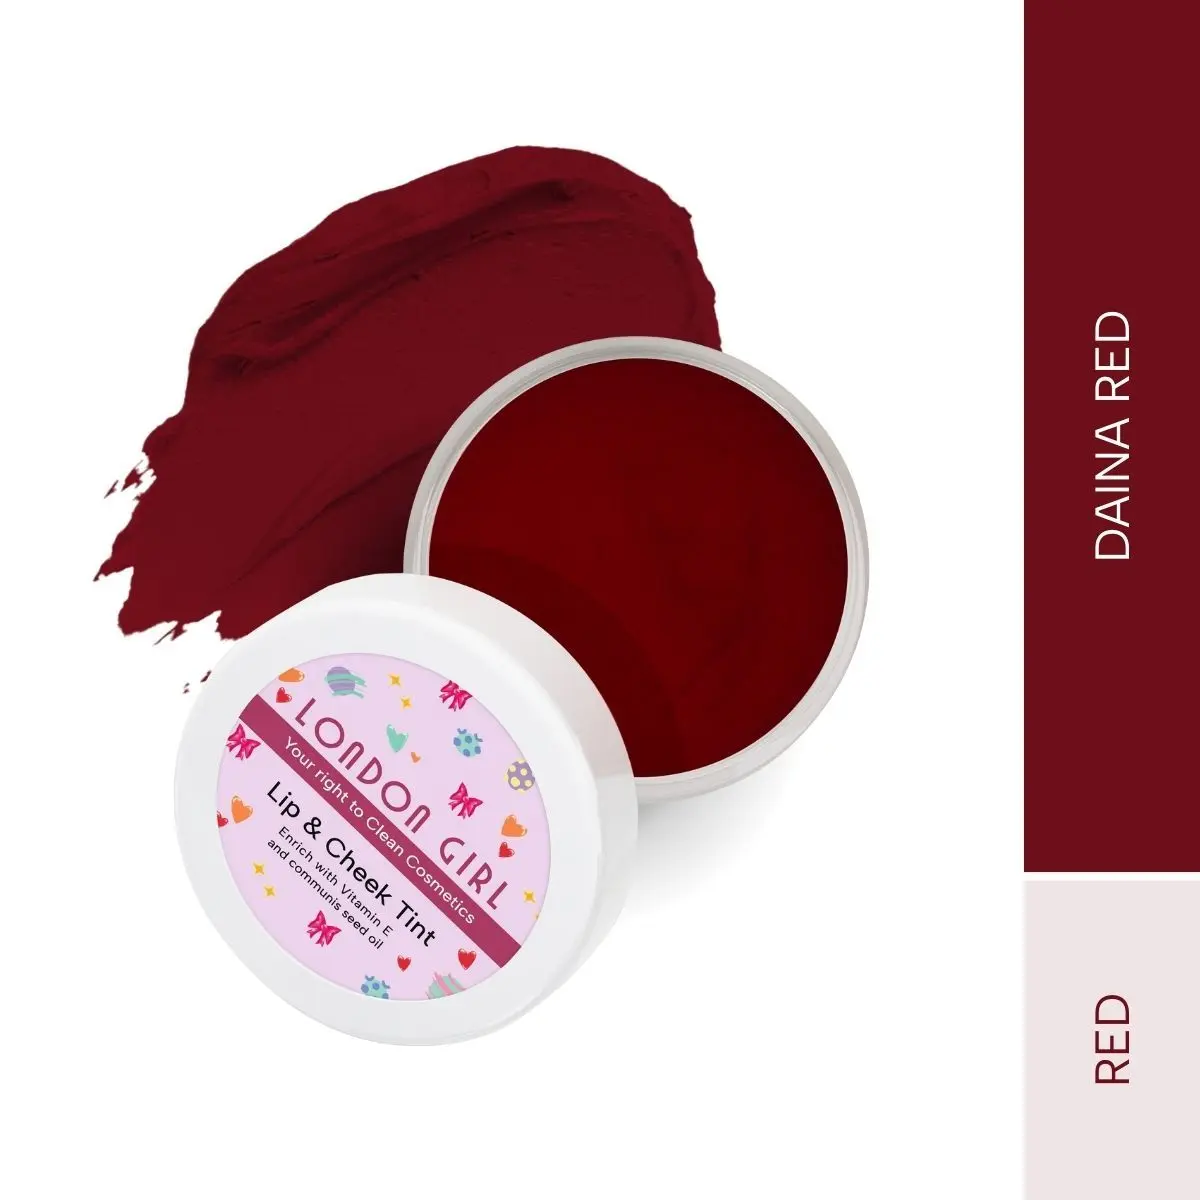 London Girl Lip and Cheek Tint | cream blush | lip tint | cheek tint for women | enriched with Vitamin-E and Communis Seed Oil - Paraben, Sulphate and SLS free (01 Diana Red)8gm